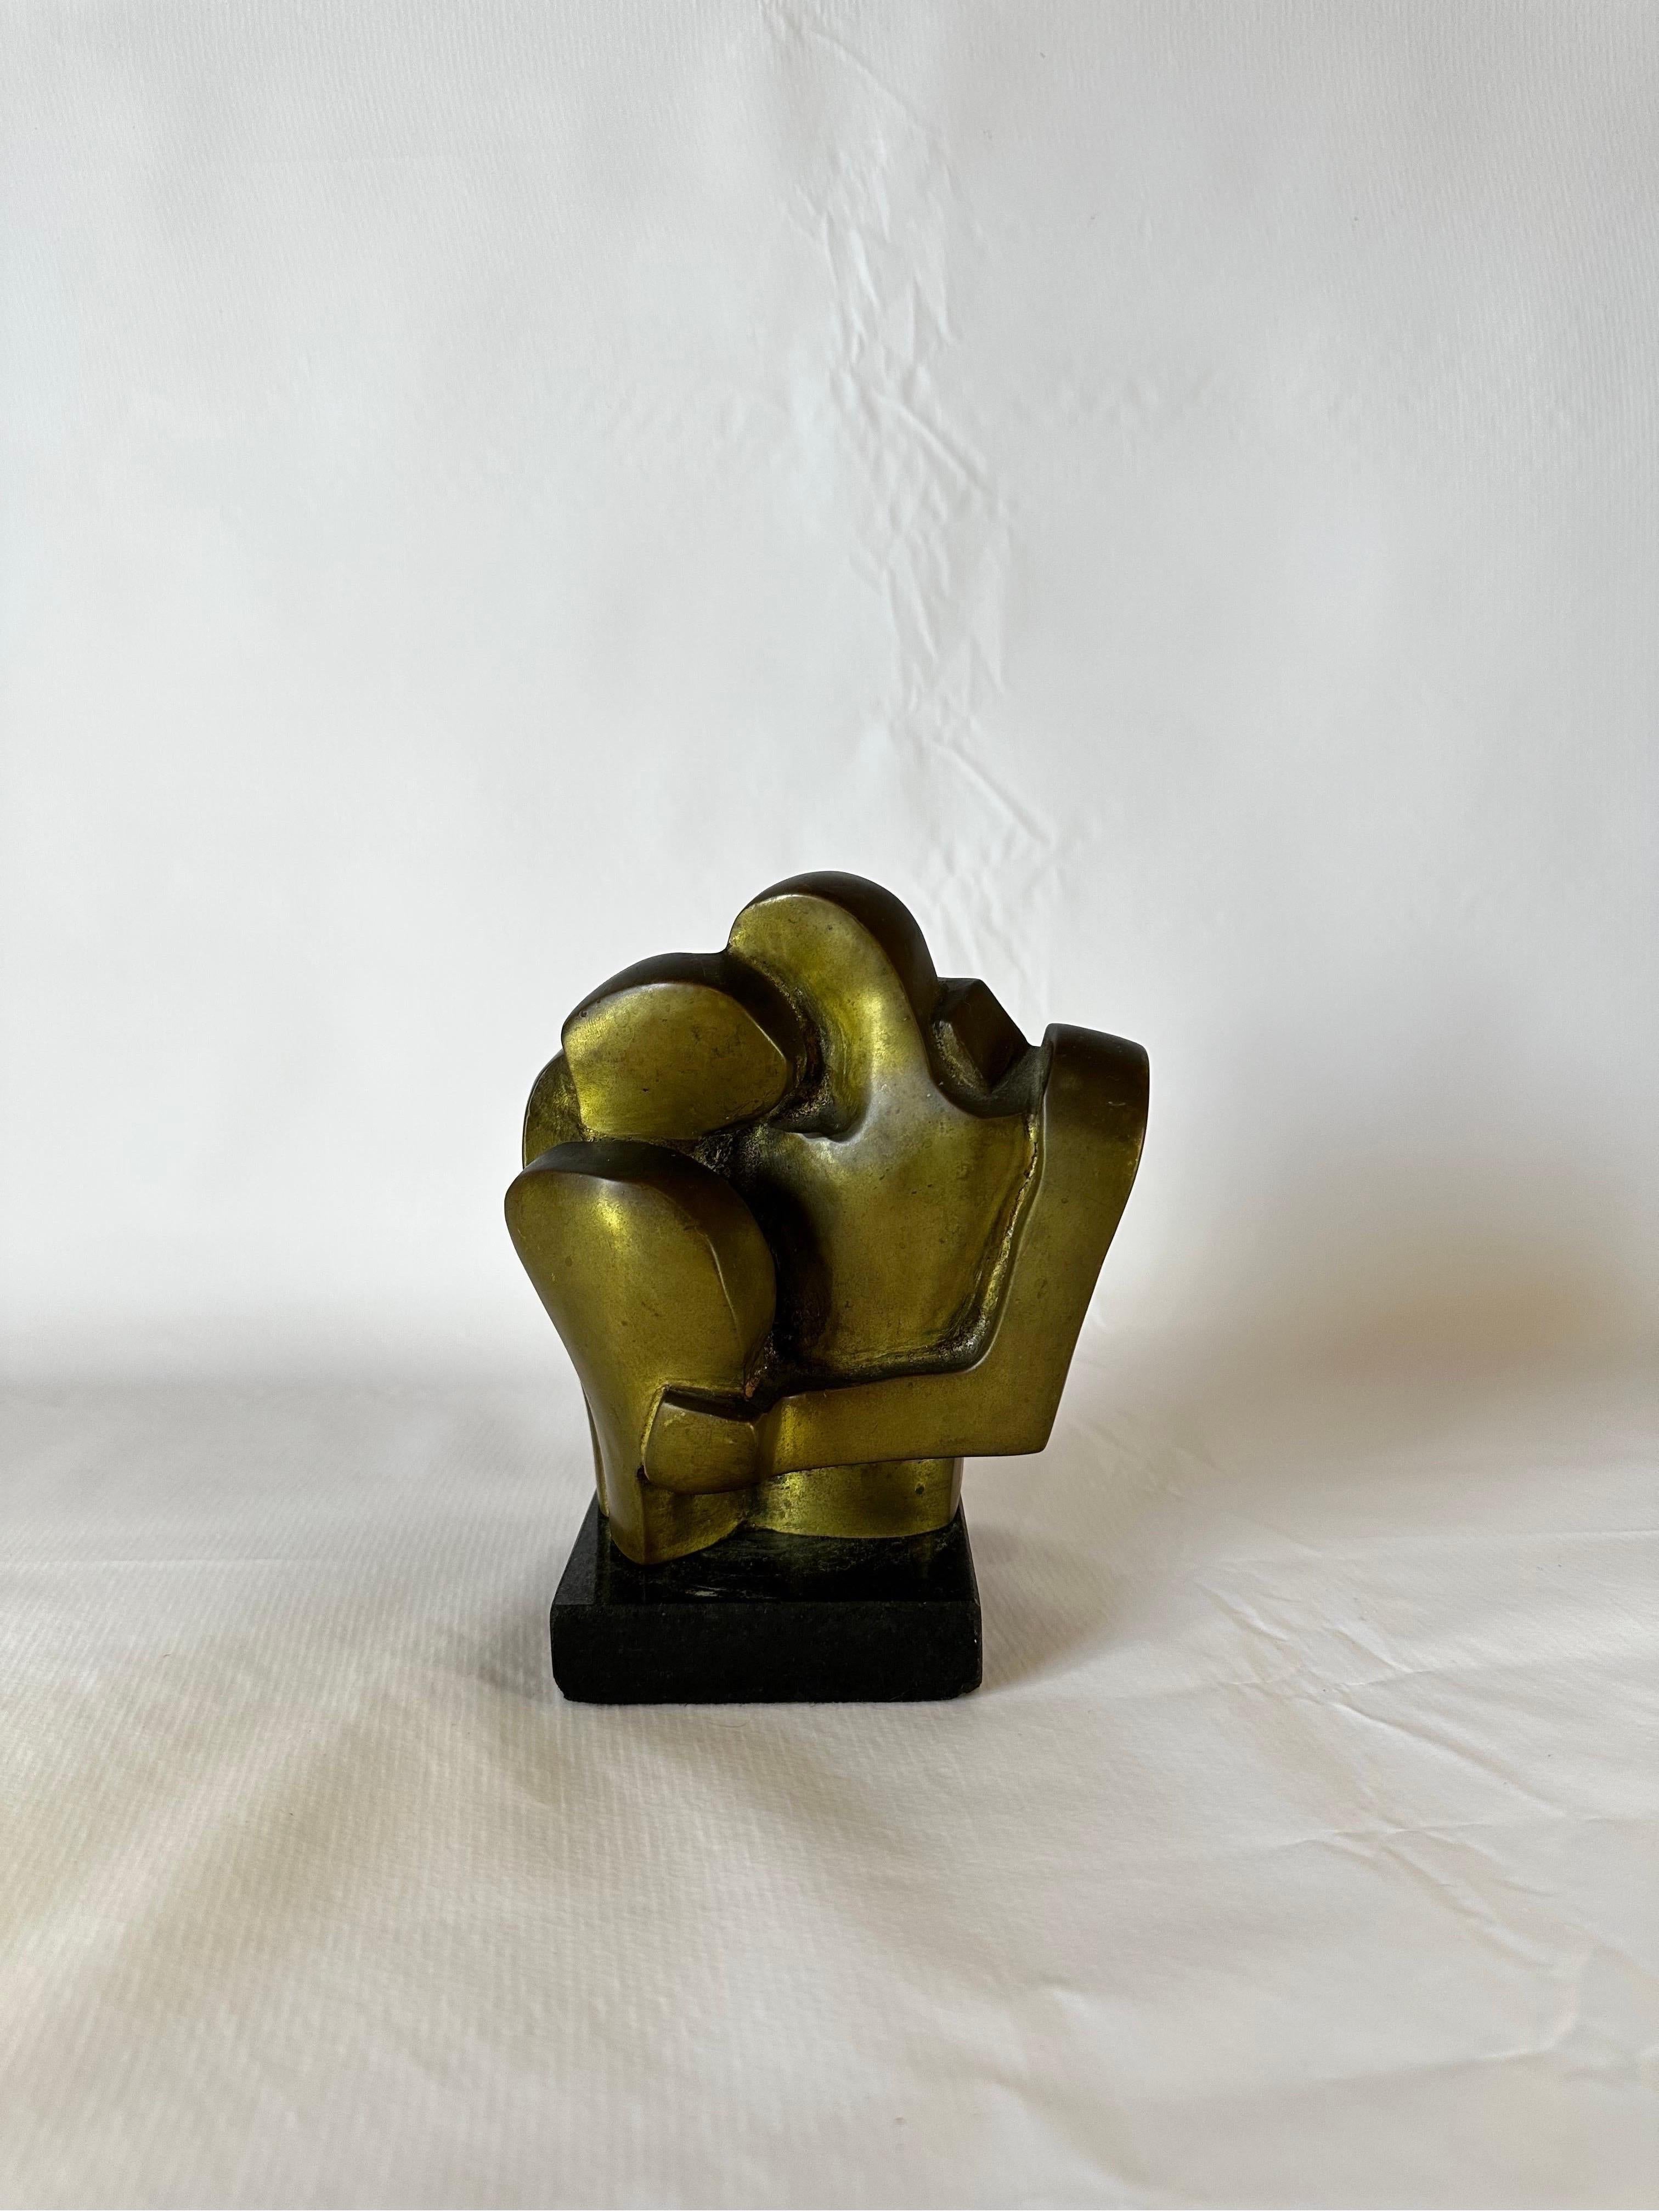 Brazilian midcentury figurative bronze sculpture on granite base of two people embracing one another. Signed by artist Graça Baião and numbered 6/30.